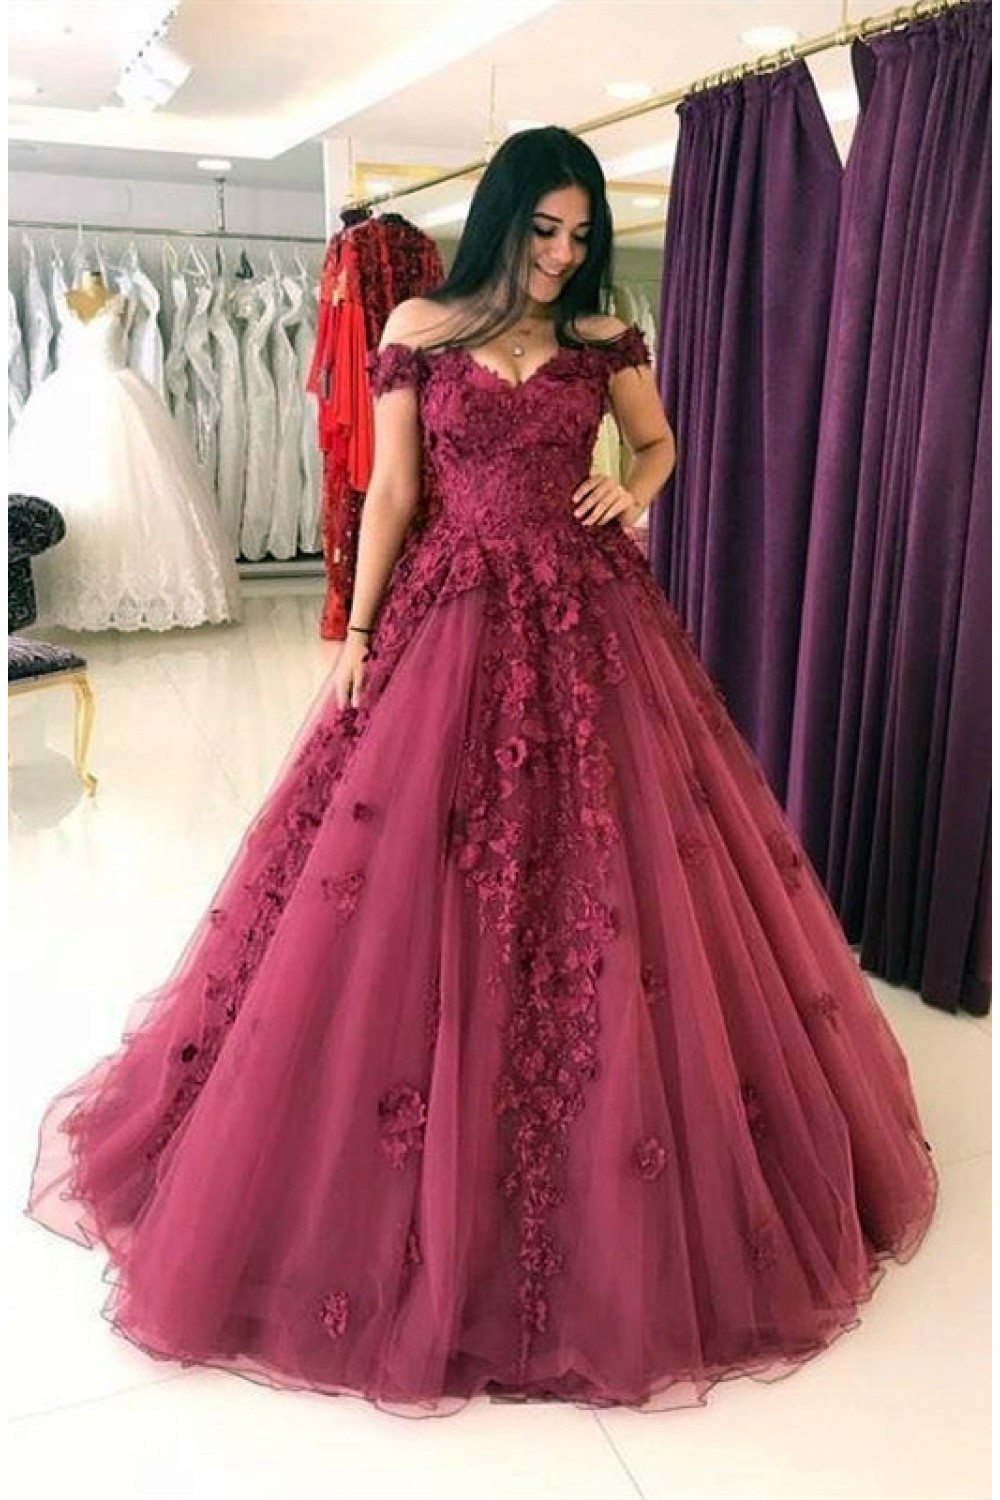 prom dress with skirt attached